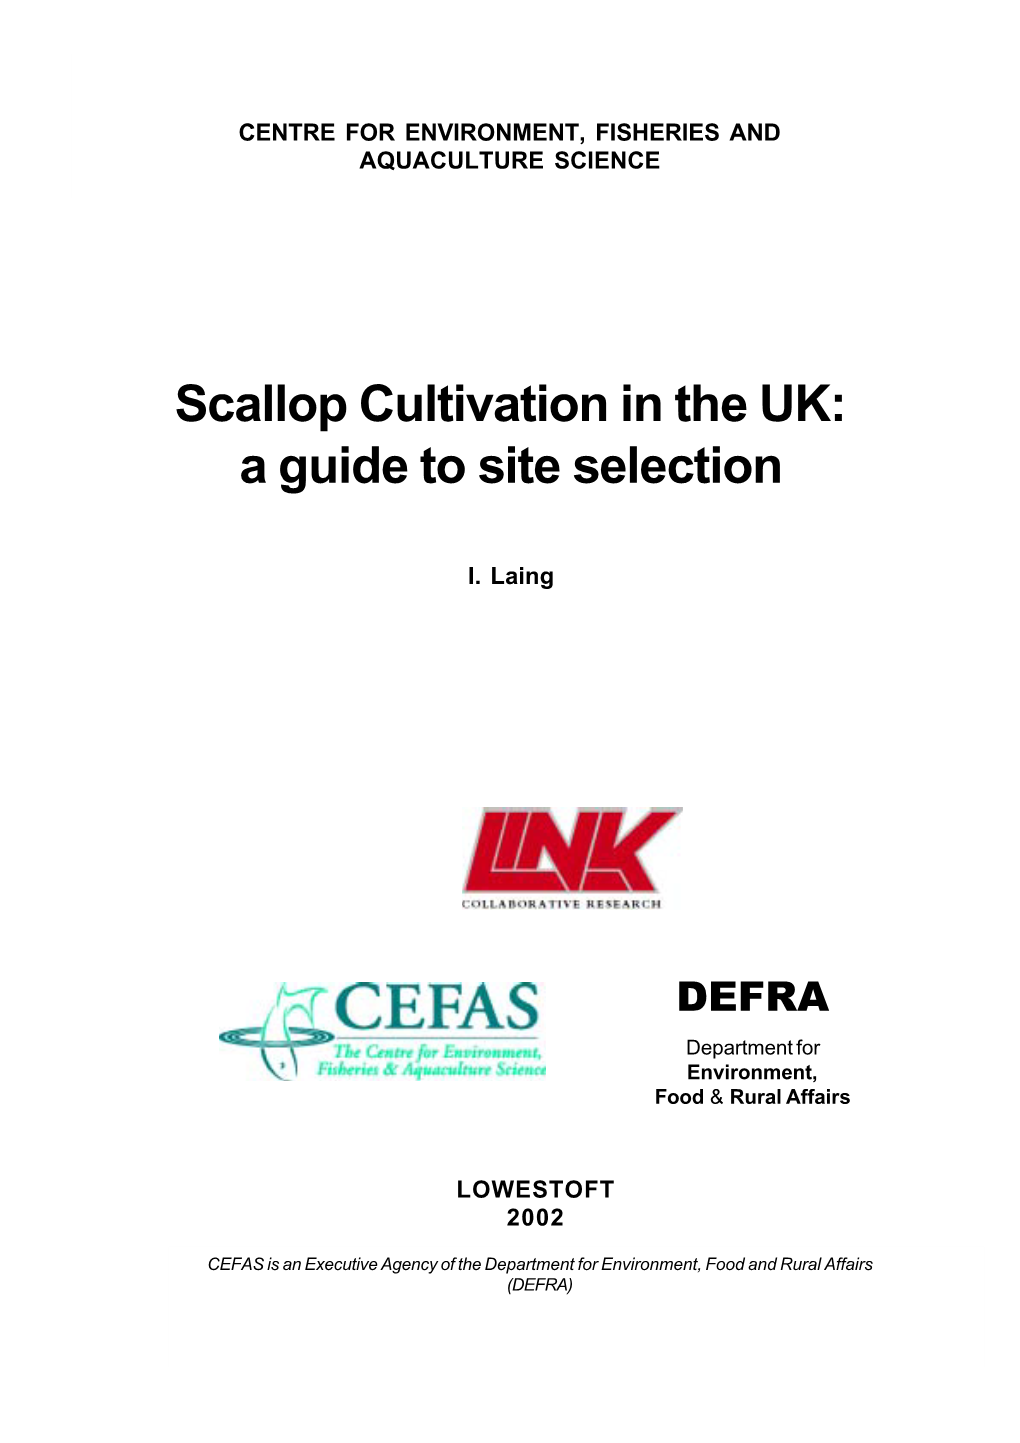 Scallop Cultivation in the UK: a Guide to Site Selection